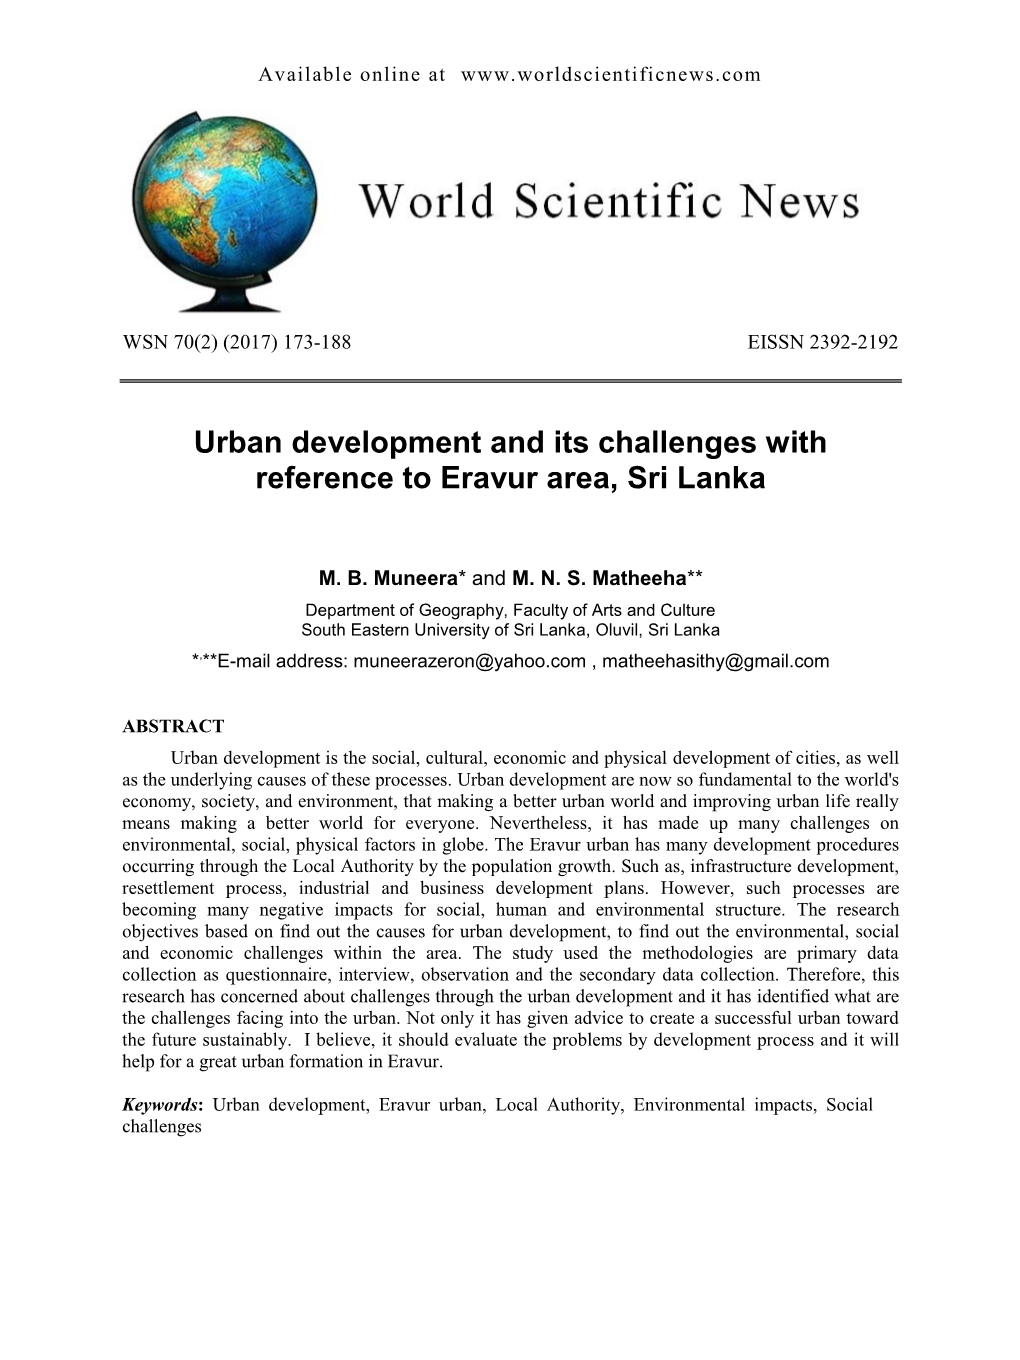 Urban Development and Its Challenges with Reference to Eravur Area, Sri Lanka